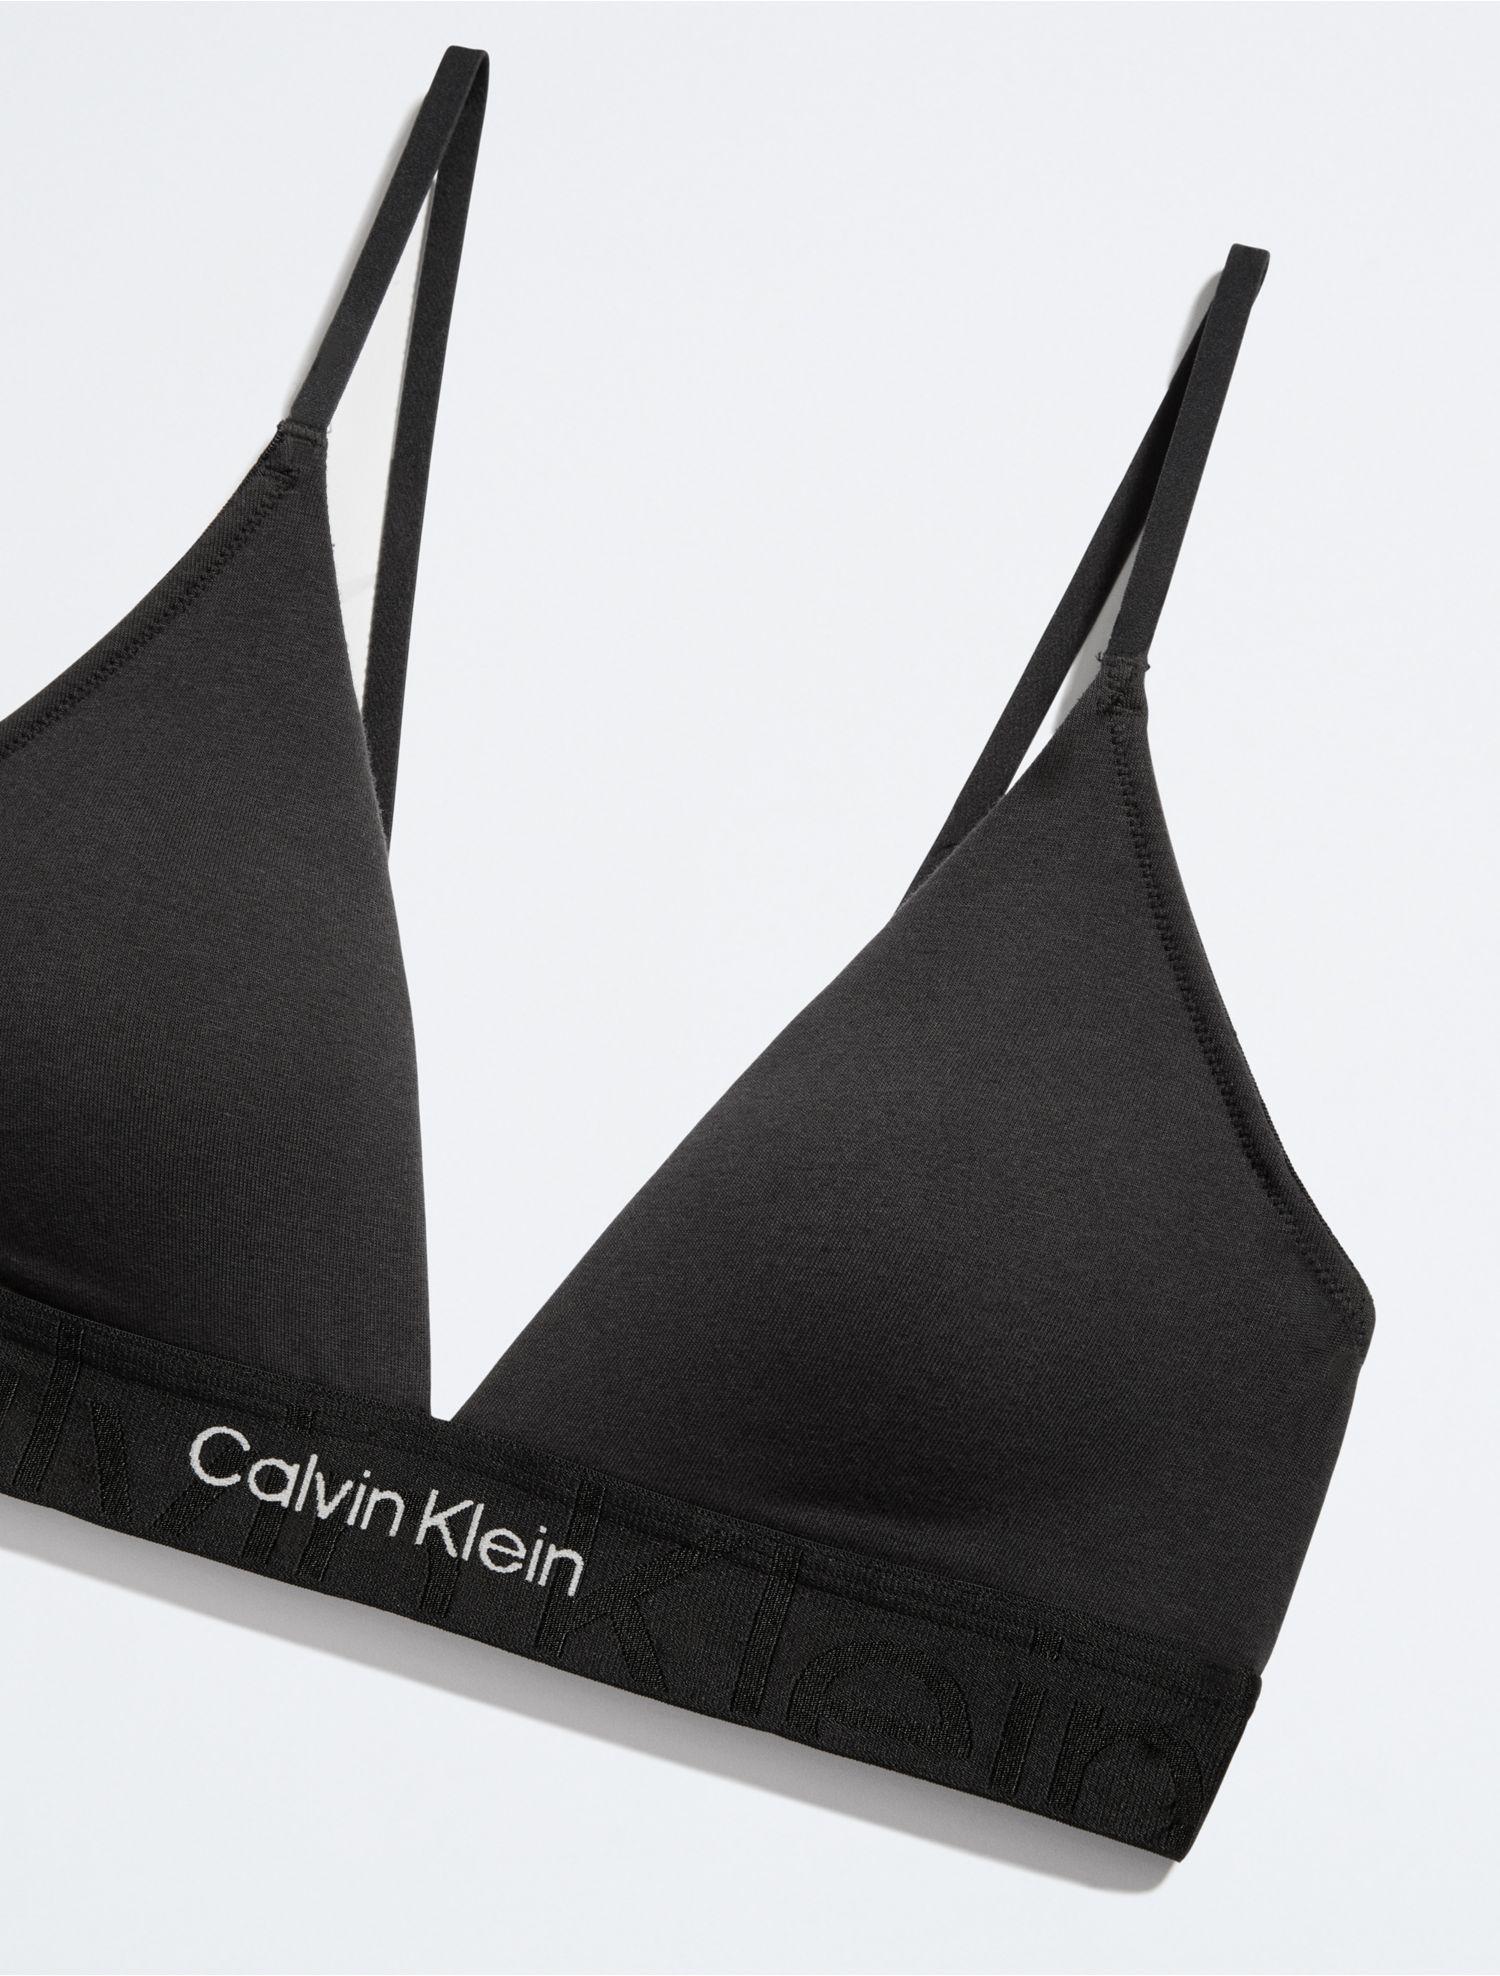 Calvin Klein Embossed Icon Lightly Lined Triangle Bralette in Black